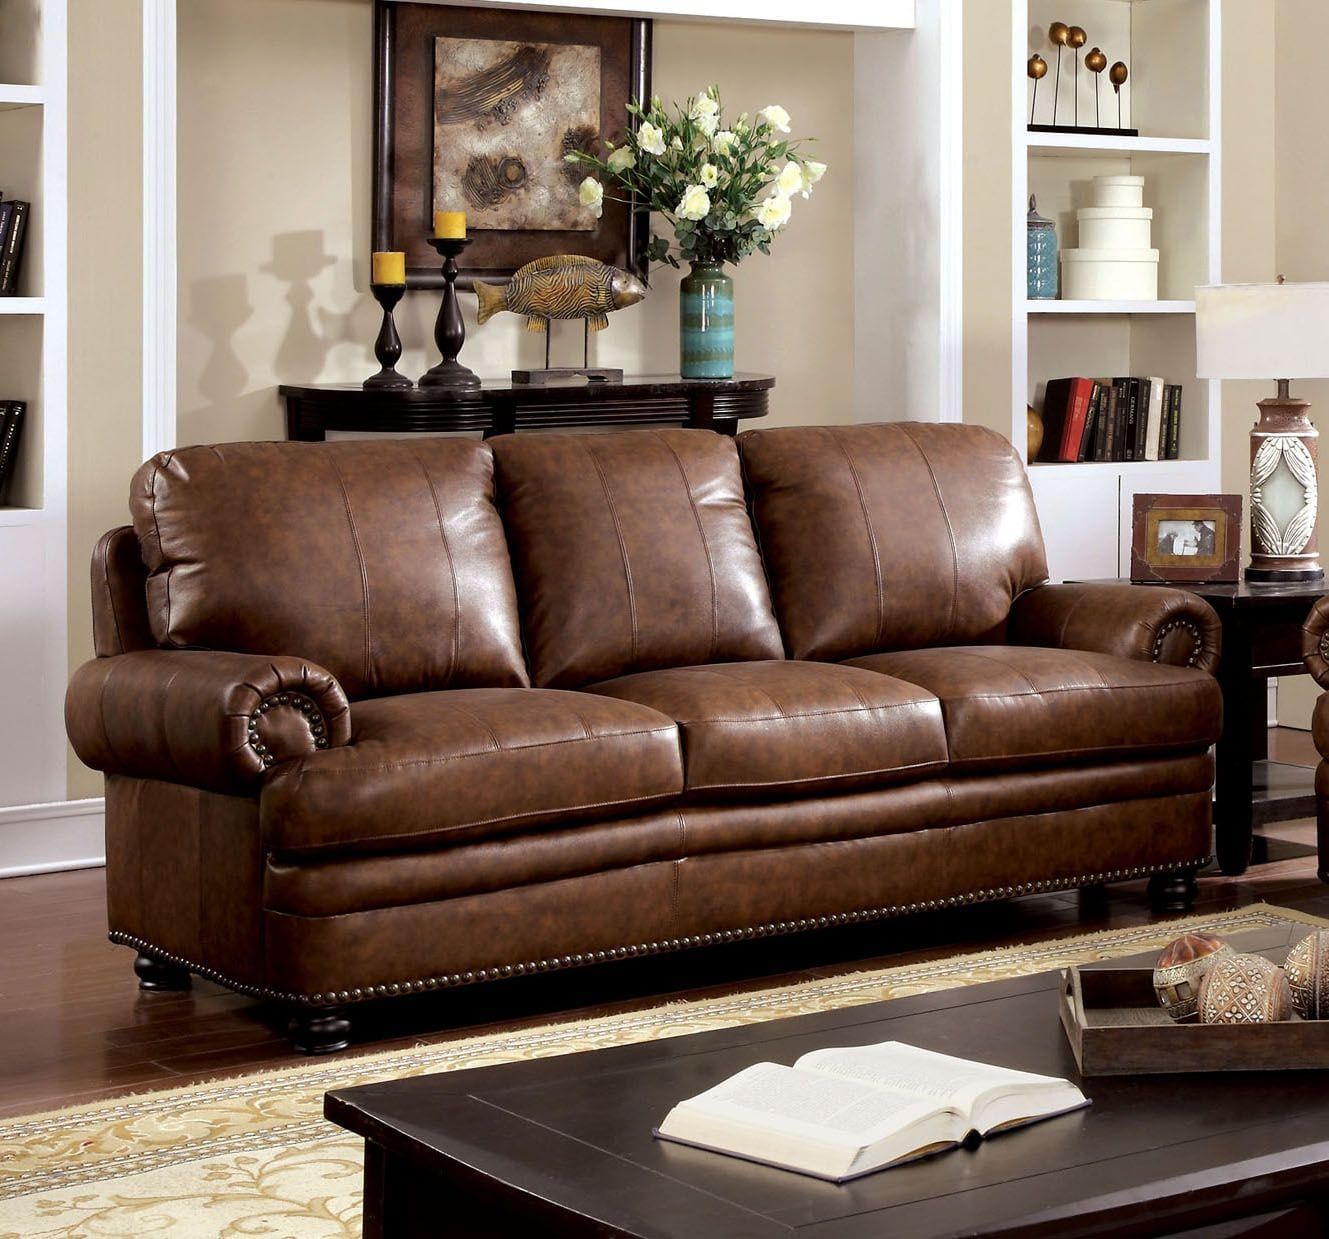 Cm6318 Sf Dark Brown Top Grain Leather Match Sofa Couch – Luchy Amor In Top Grain Leather Loveseats (View 10 of 20)